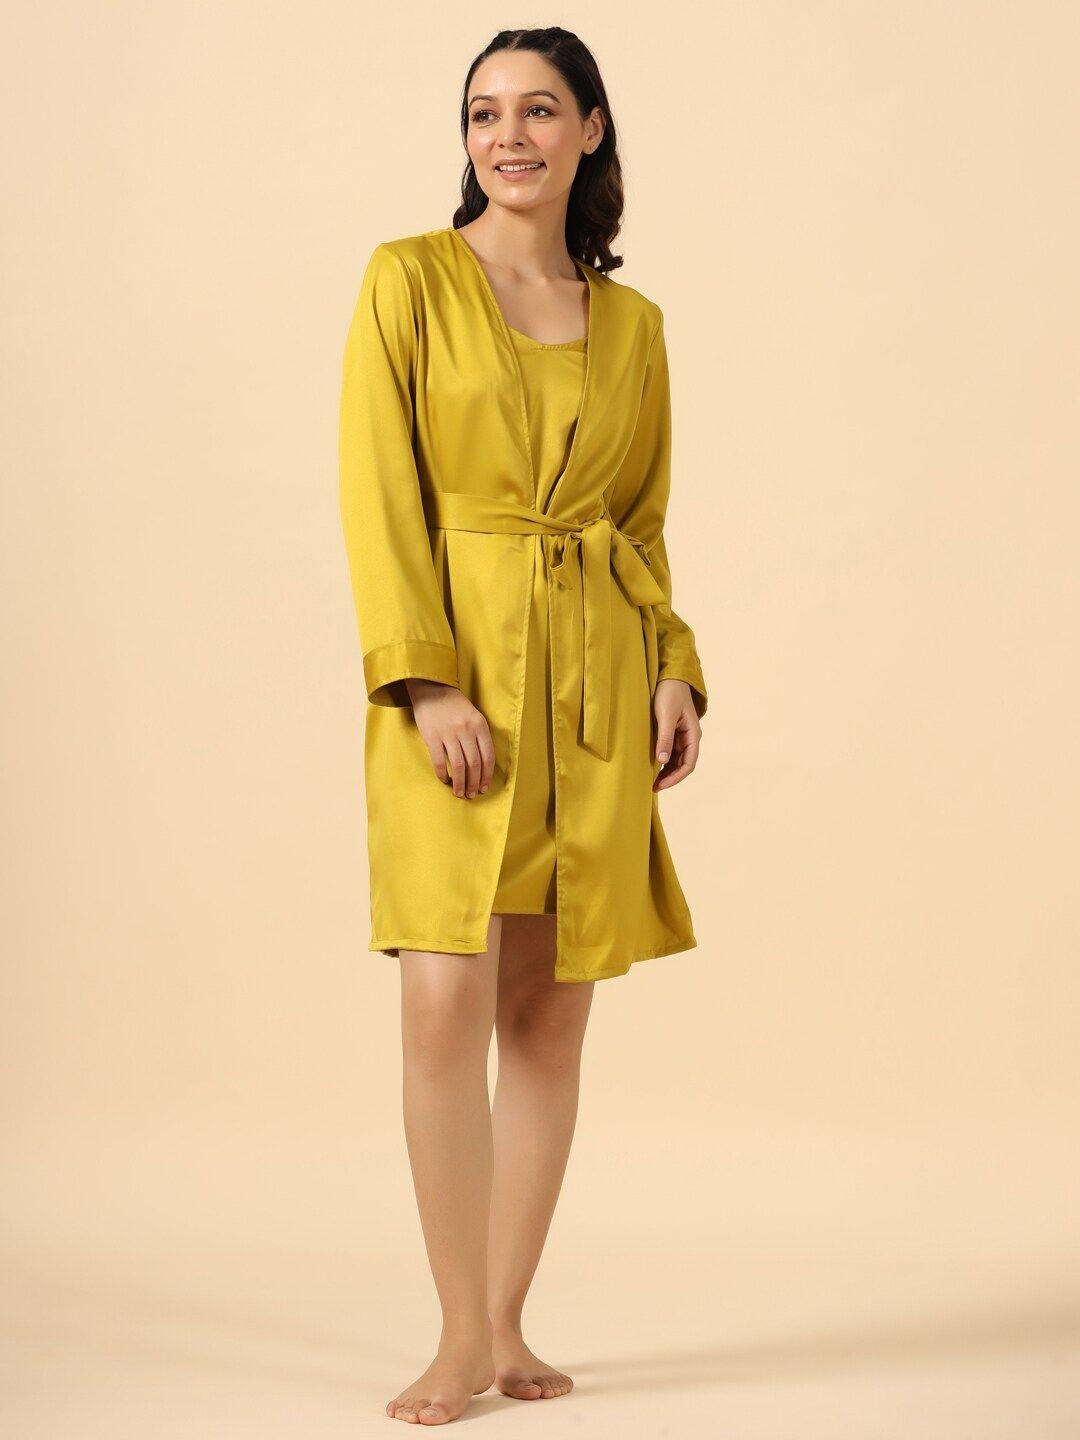 etc mustard yellow shoulder straps satin wrap nightdress comes with robe